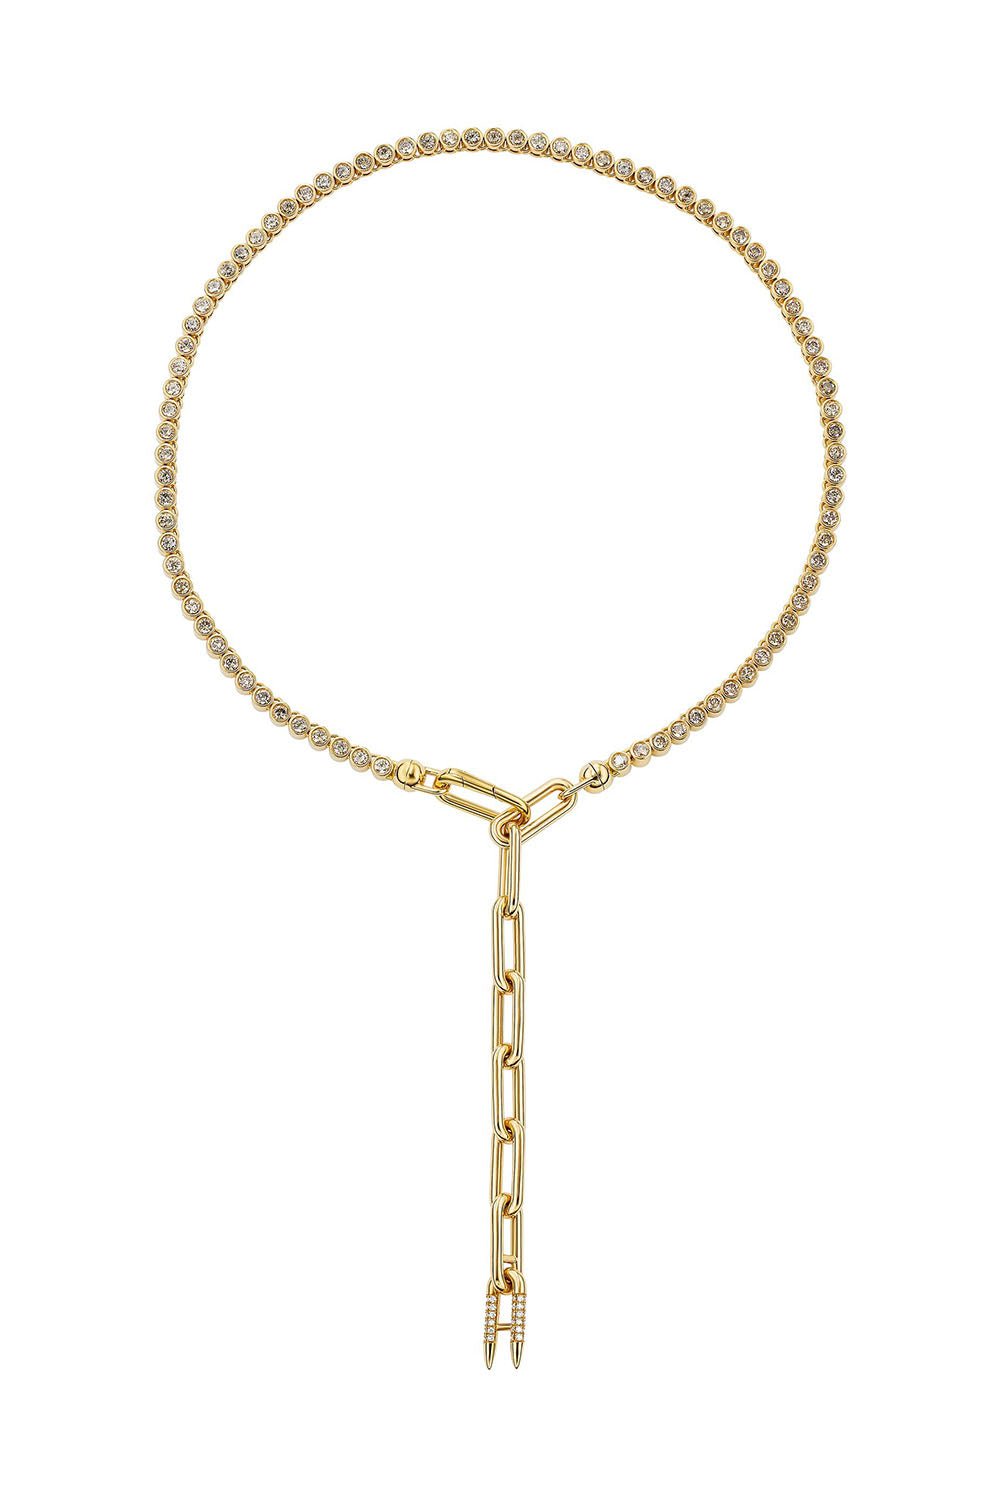 UNIFORM OBJECT-Heavy Metal Tennis Necklace-YELLOW GOLD